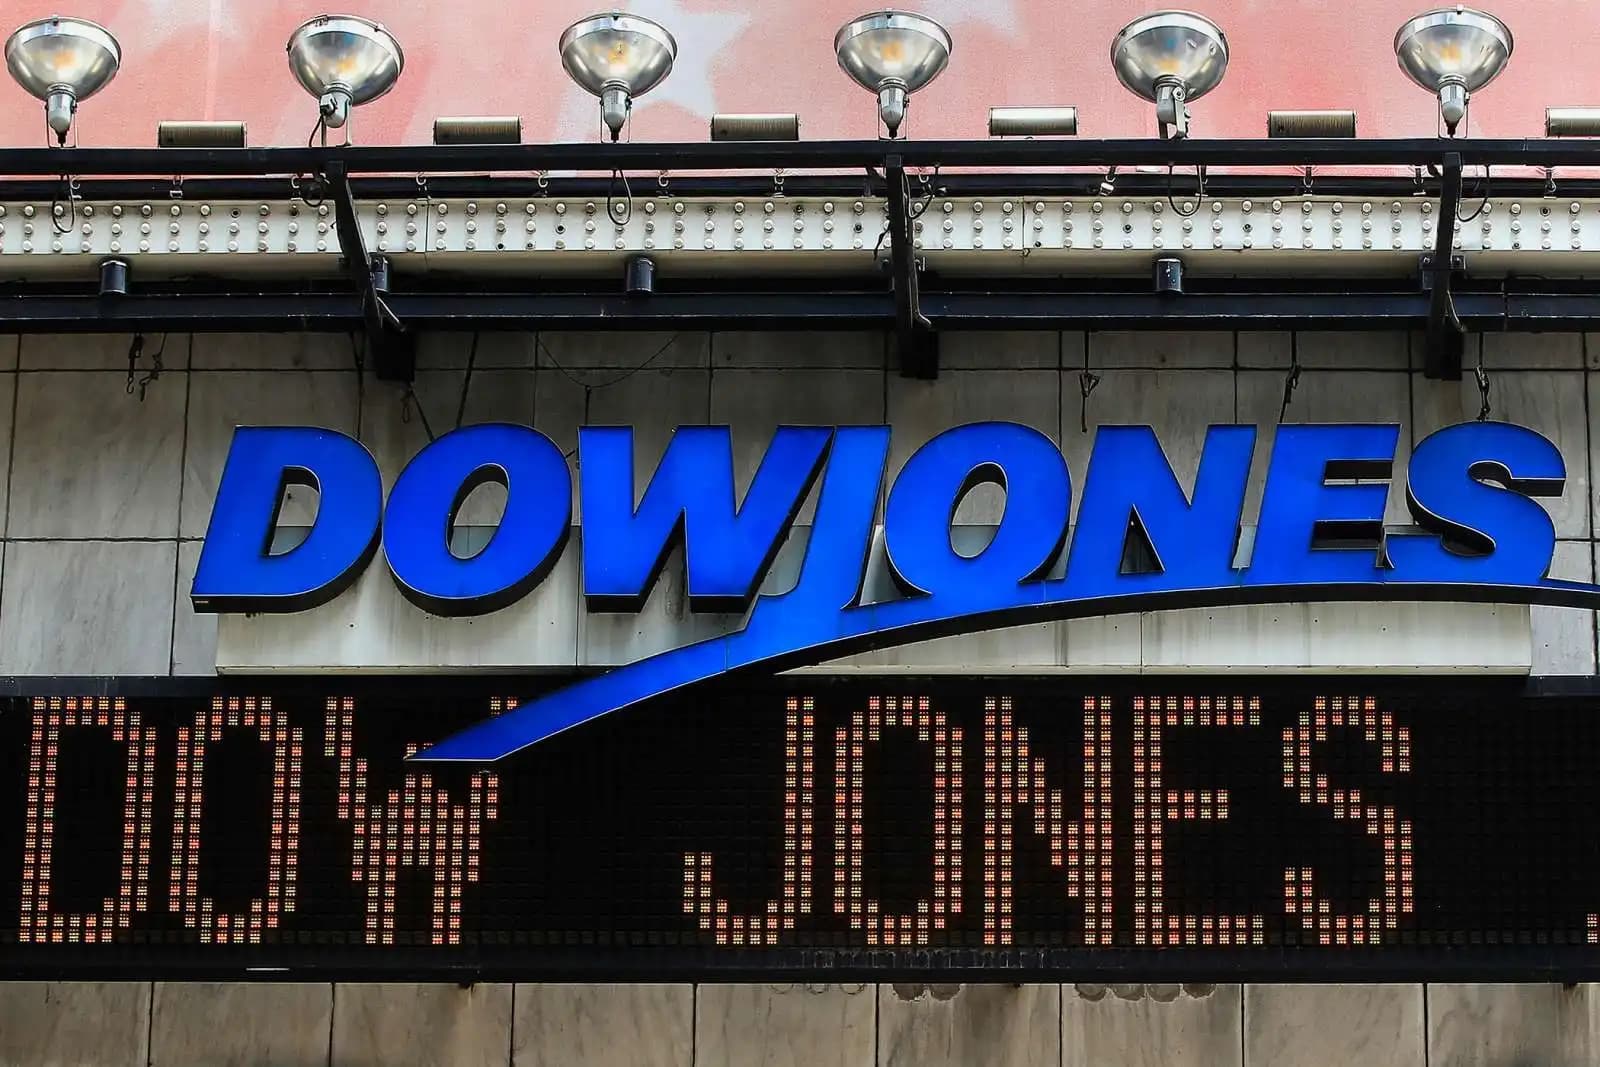 What is the Dow Jones Industrial Average